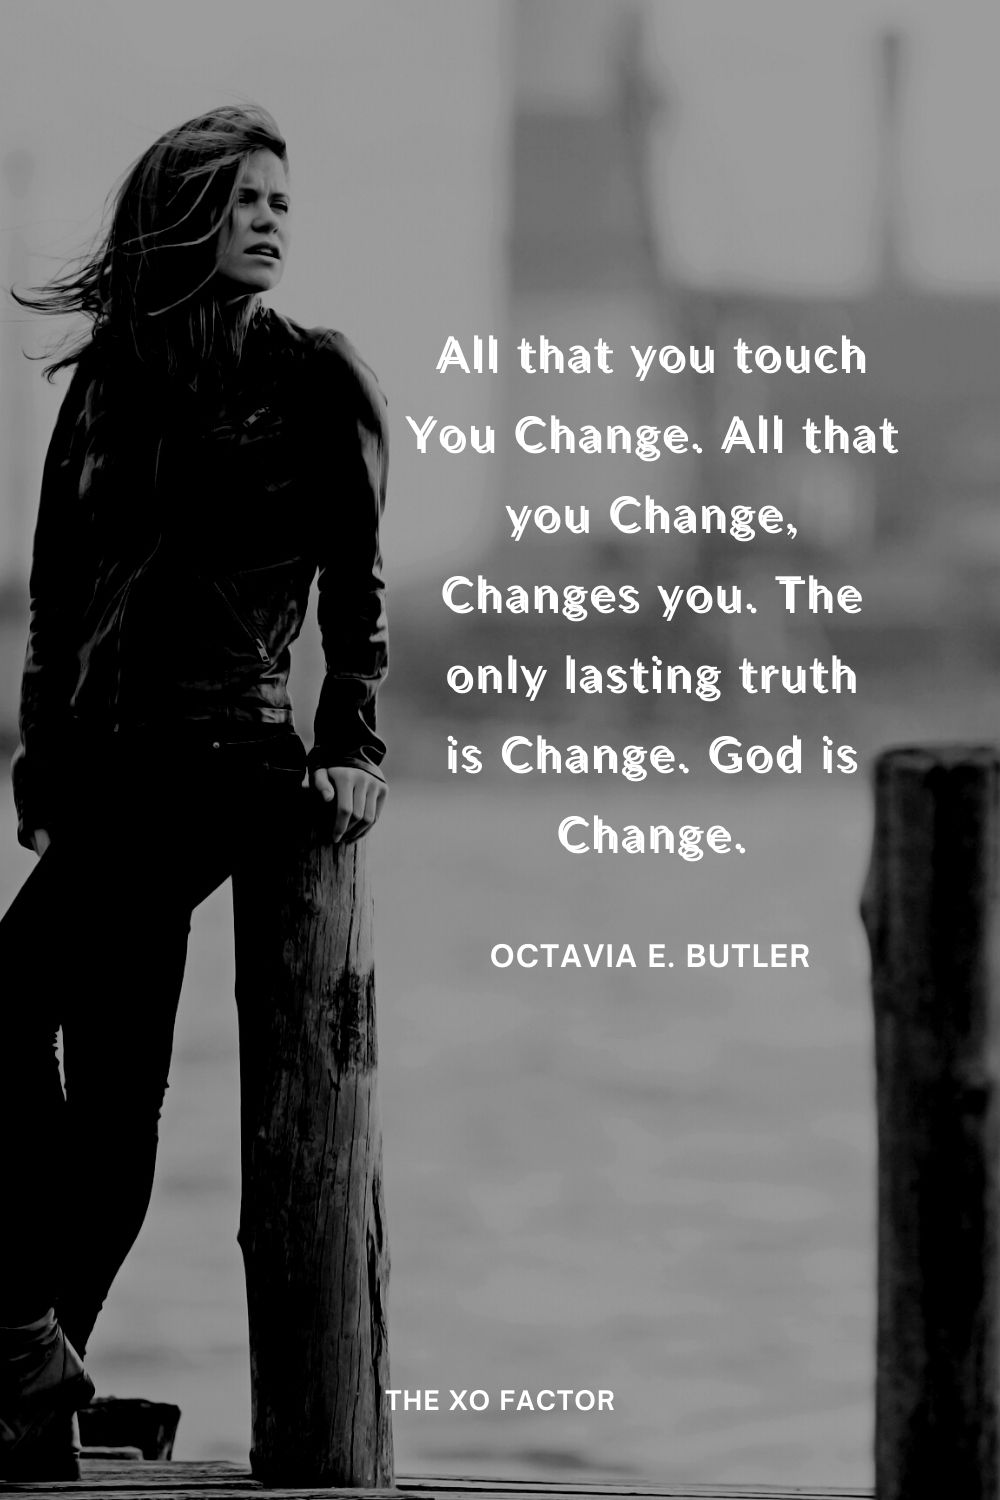 All that you touch You Change. All that you Change, Changes you. The only lasting truth is Change. God is Change.